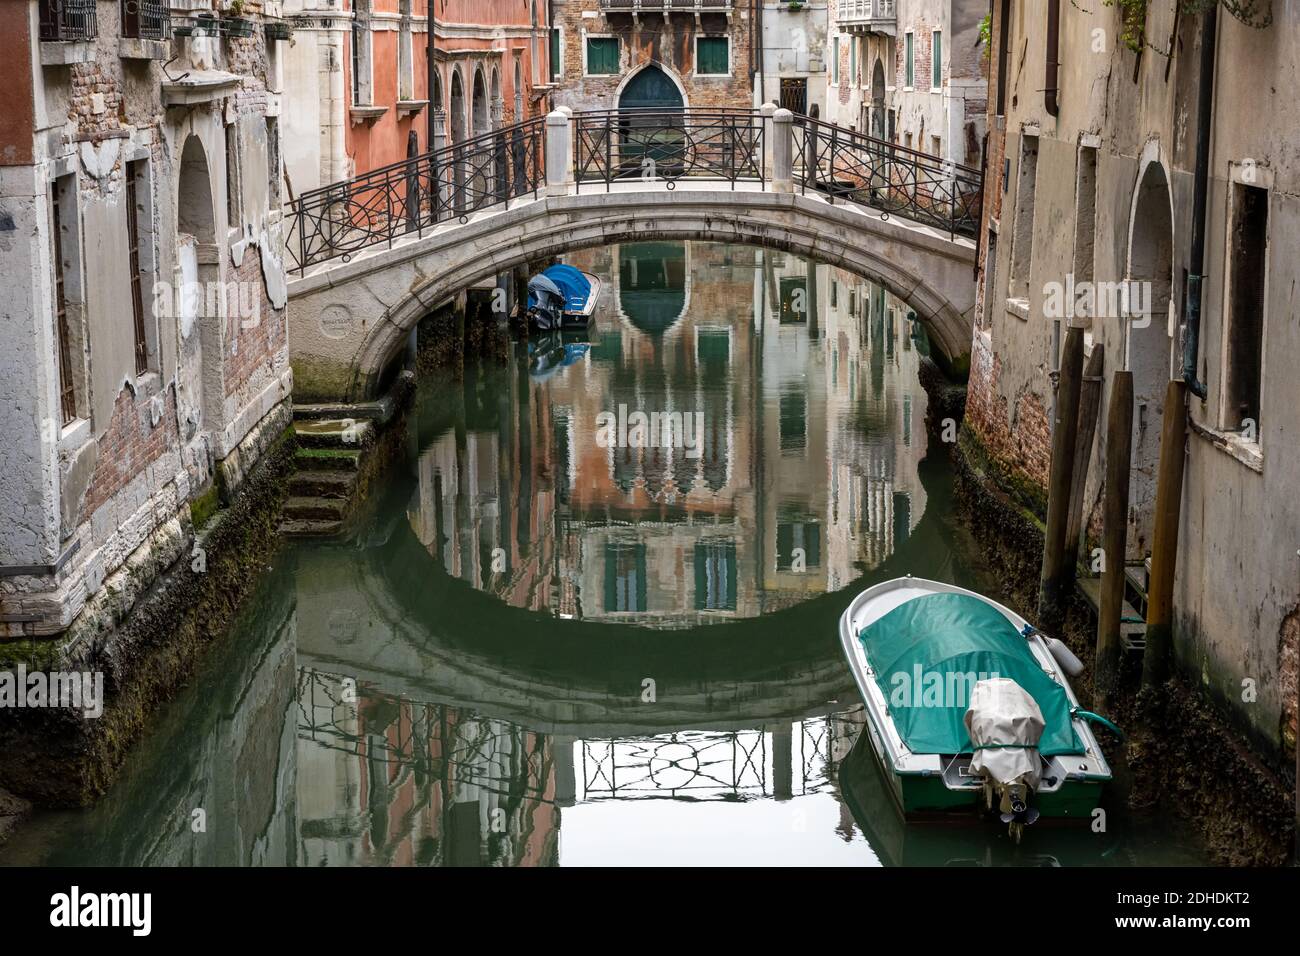 Tranquil scene in one of the small canals in the old town of Venice, Italy Stock Photo